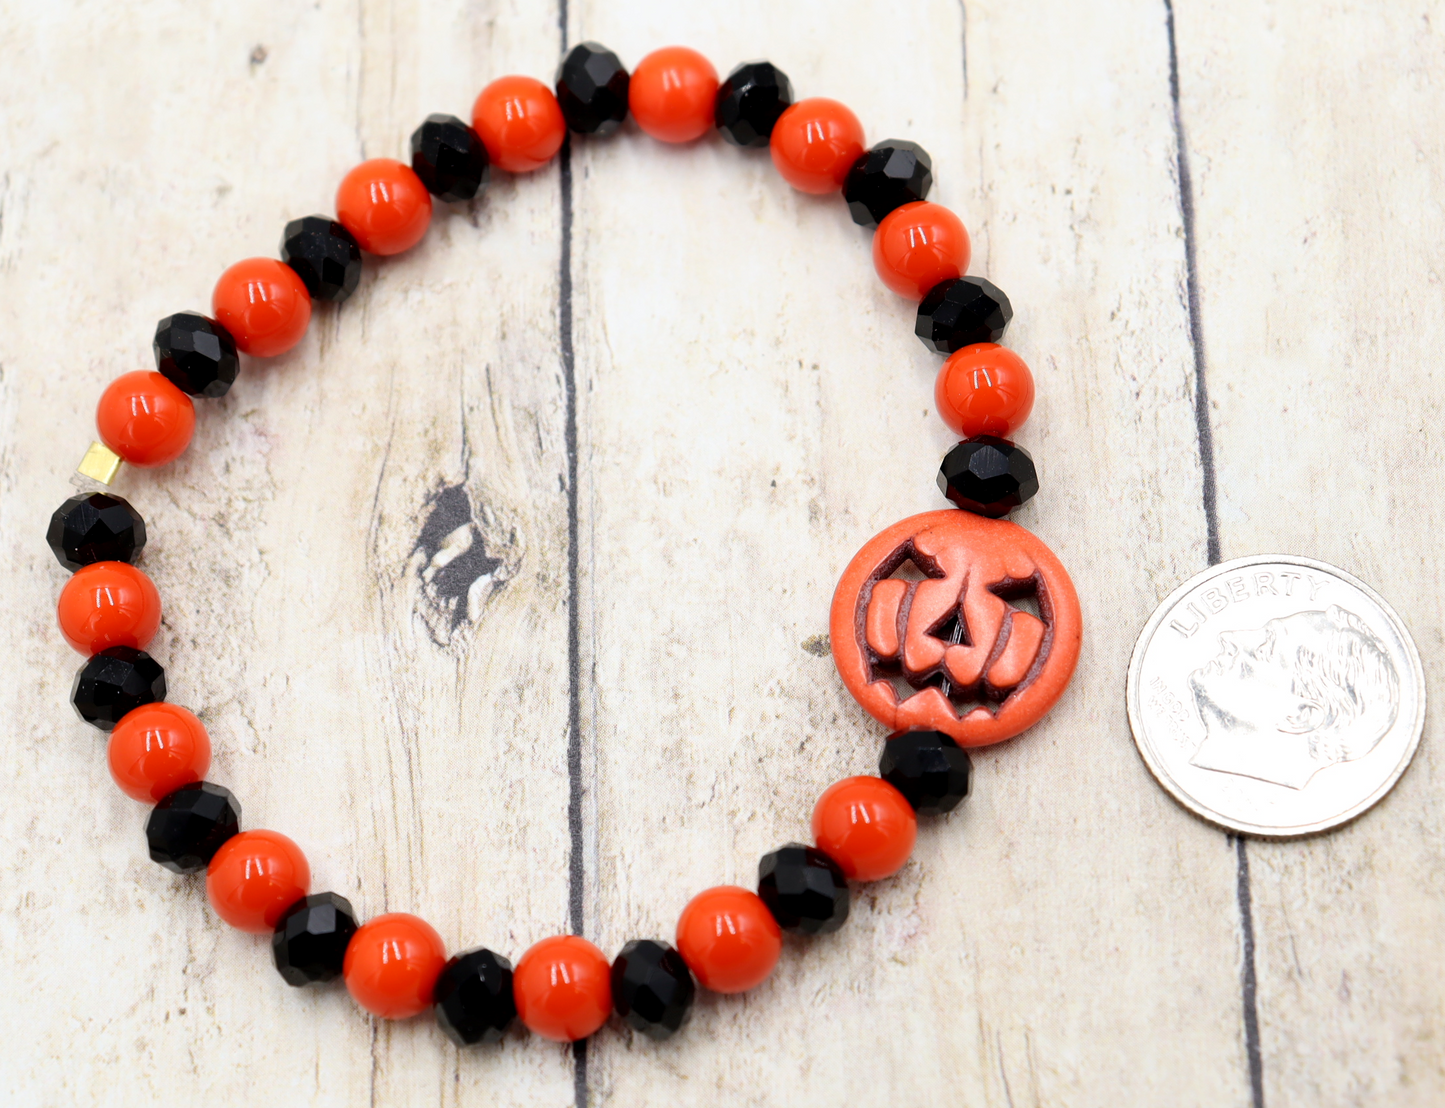 Tricking and Treating Classic Orange and Black Craved Pumpkin Glass Bead Stretch Bracelet by Monkey's Mojo